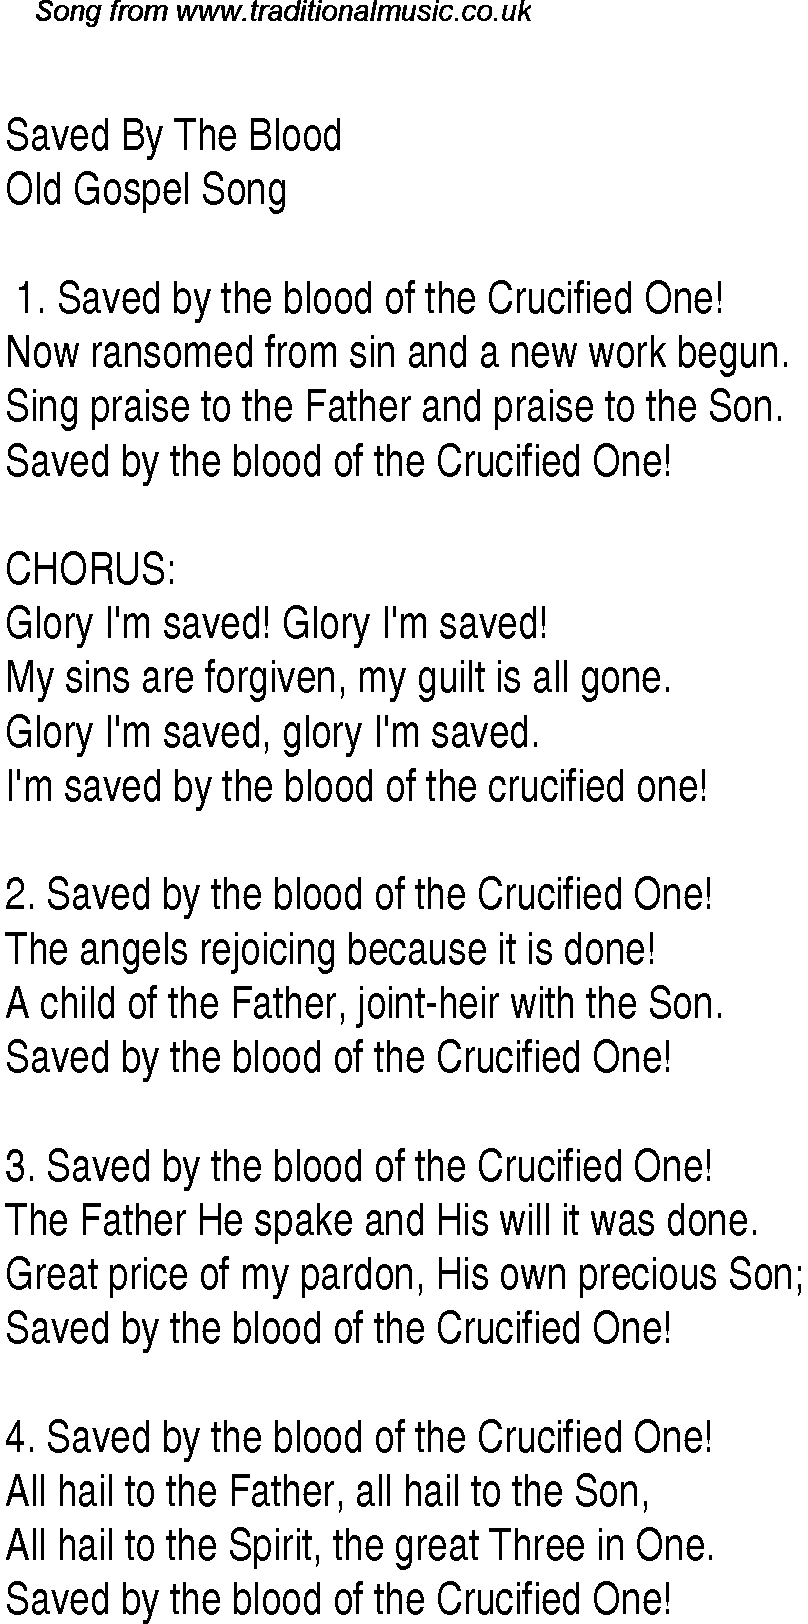 Gospel Song: saved-by-the-blood, lyrics and chords.